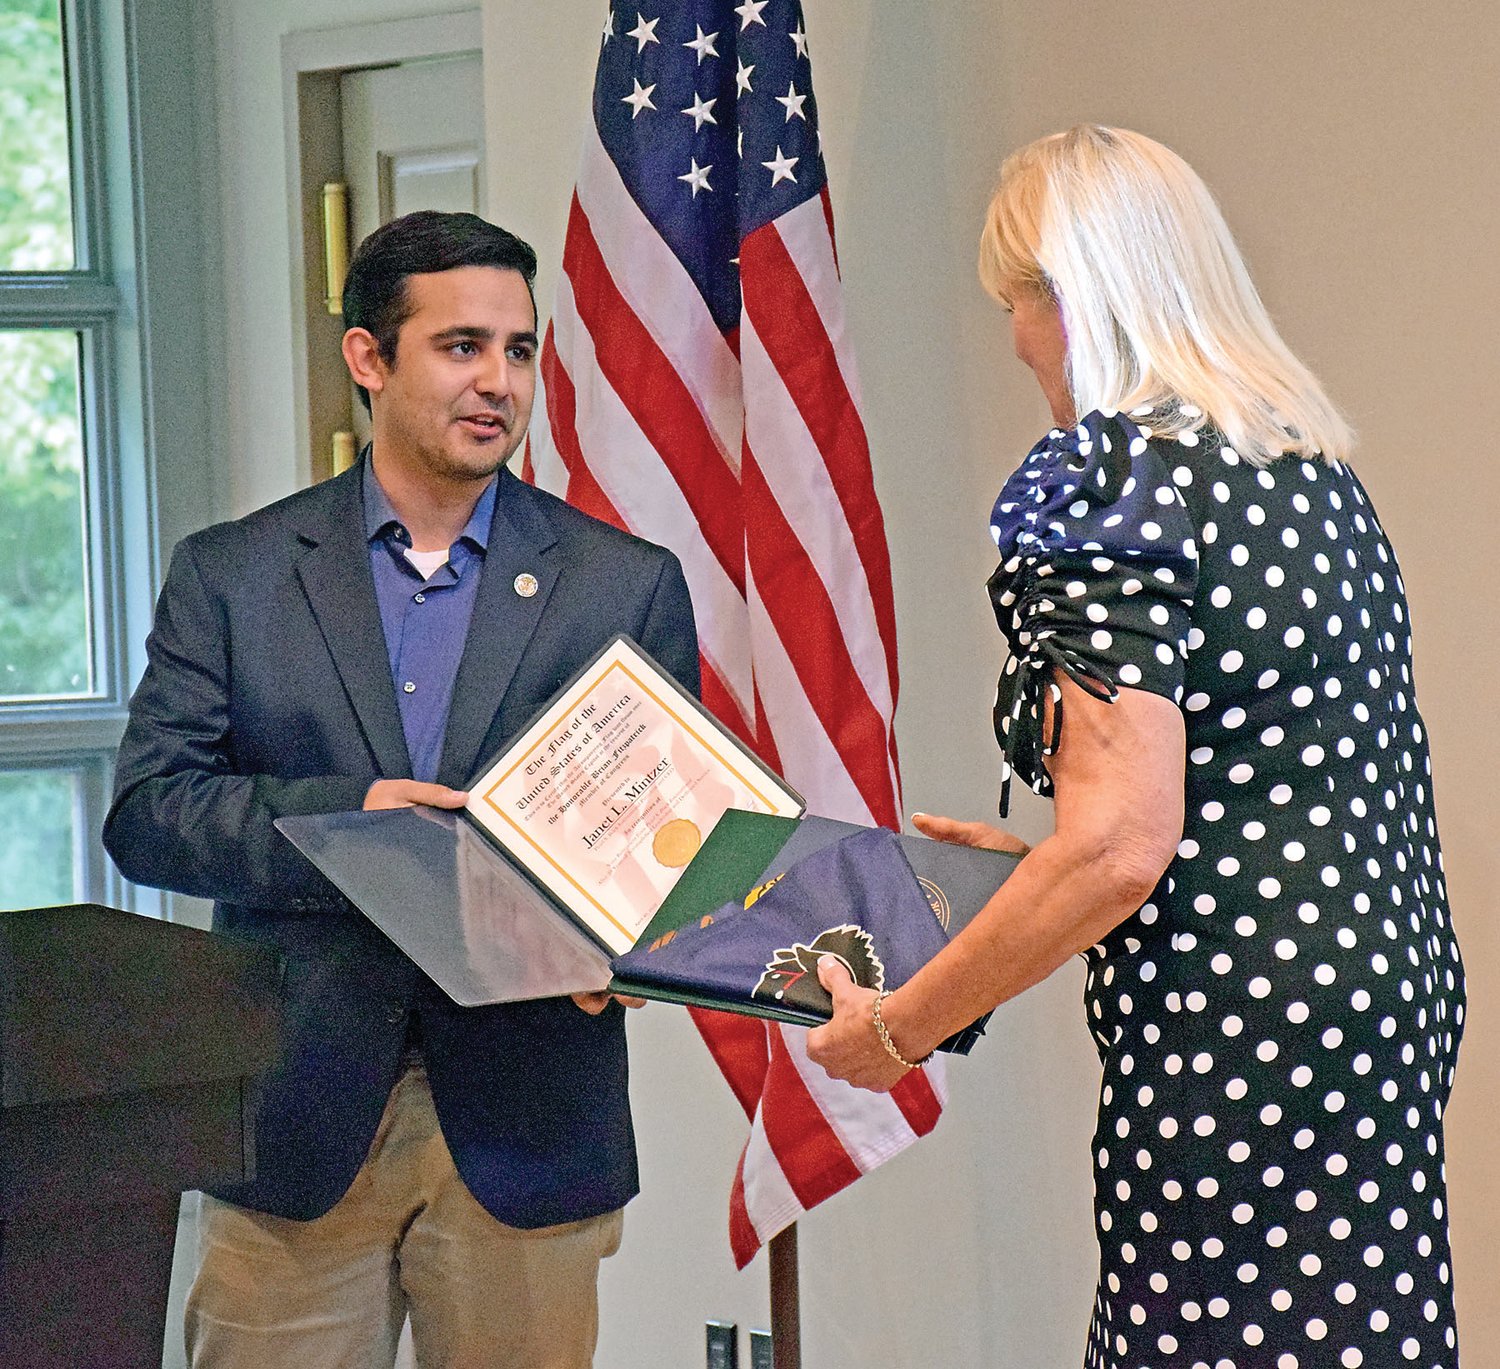 On behalf of U.S. Rep. Brian Fitzpatrick, Ryan Oister gives a certificate of achievement to Janet L. Mintzer.